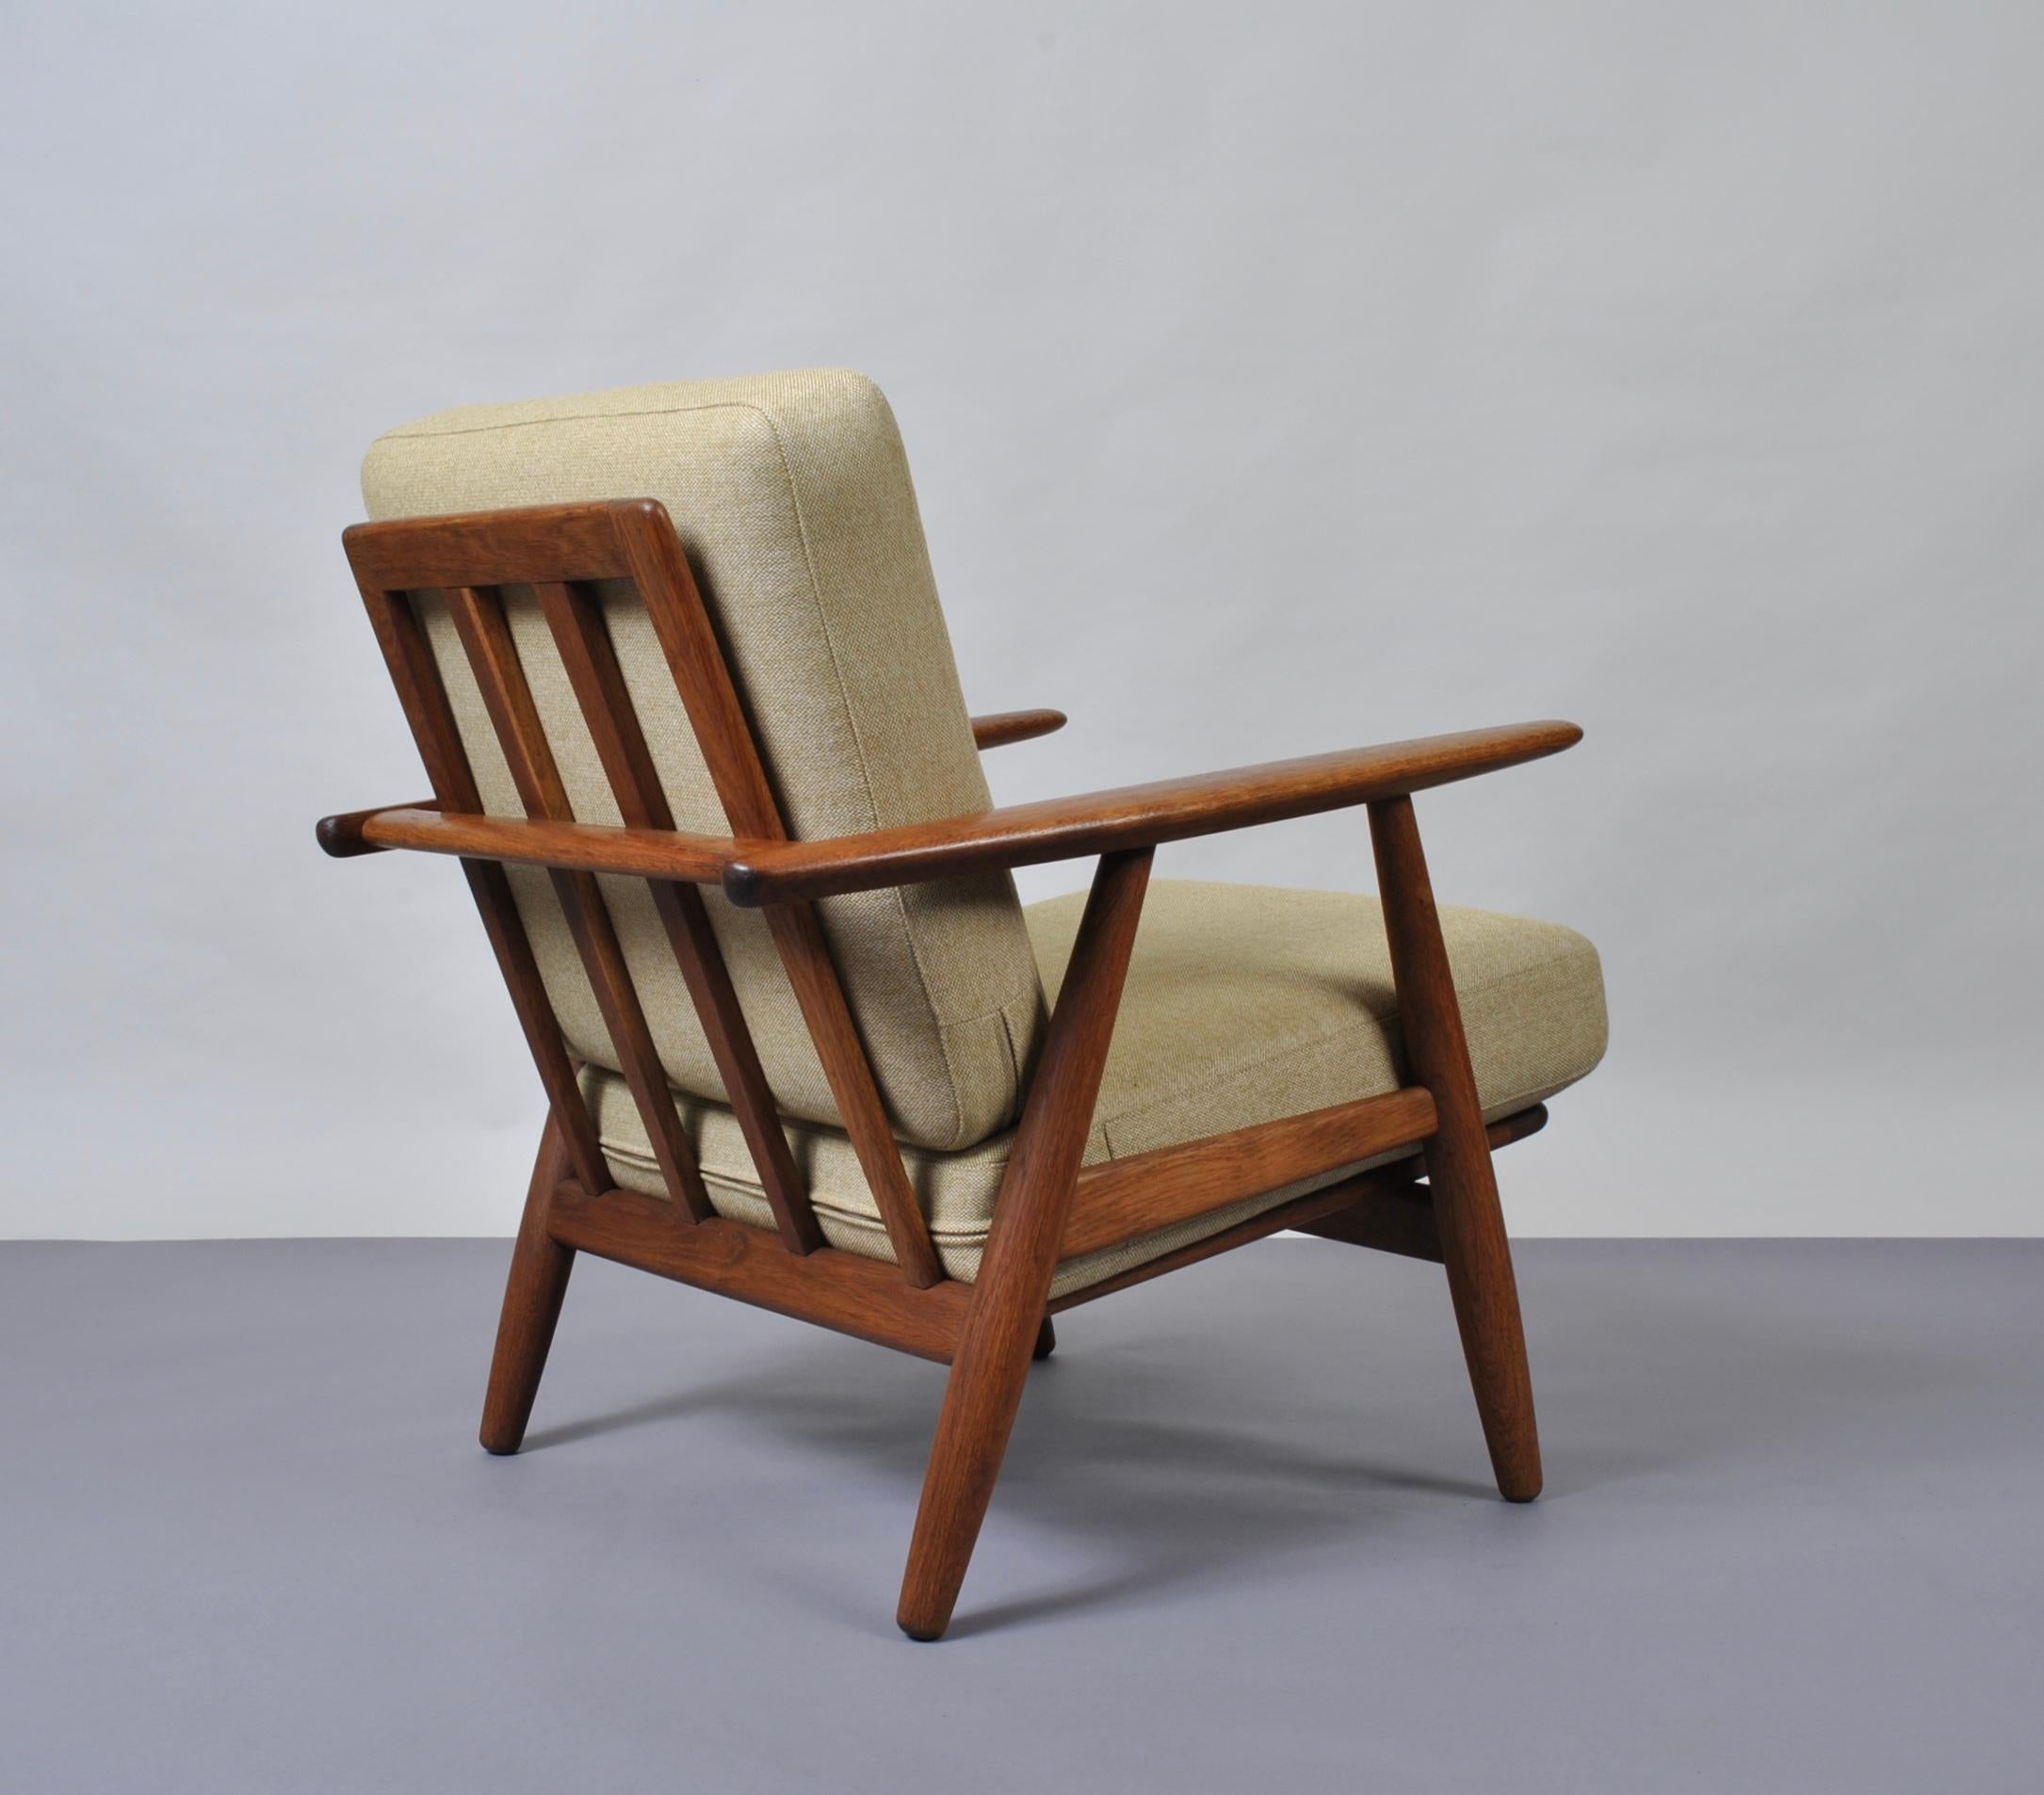 An original 1950s Hans J Wegner GE240 cigar chair, produced by GETAMA, Denmark.
Fumed oak frame with all new Camira wool flax weave upholstery. A coveted Danish classic by the master of chair design. Custom Reupholstery is available. Makers/design